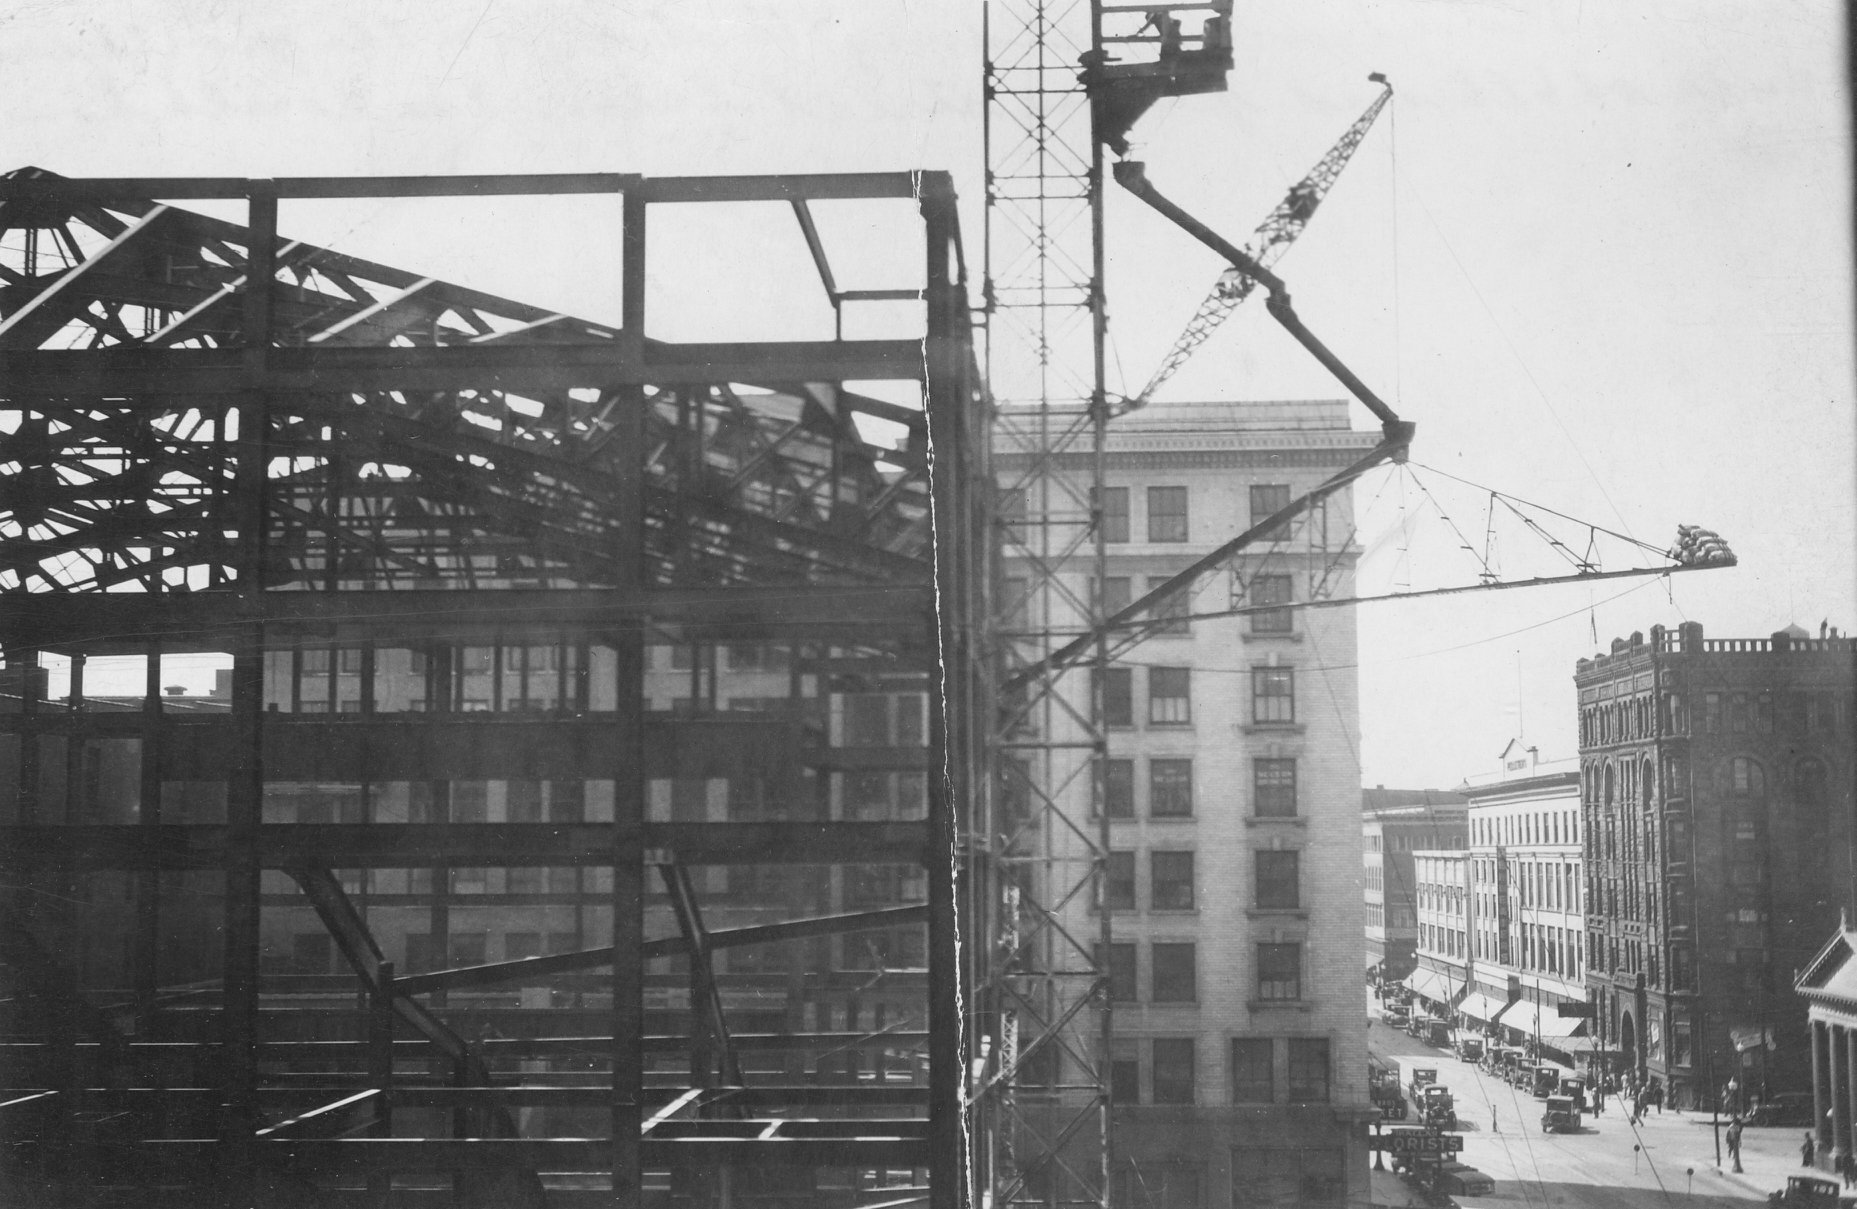 On this day in Sioux City history: This image of the construction of the Orpheum Theatre was taken on May 12, 1927. Located at the corner of Sixth and Pierce Streets, the lavishly-decorated 2,600-seat venue opened on December 19, 1927. A four-story a